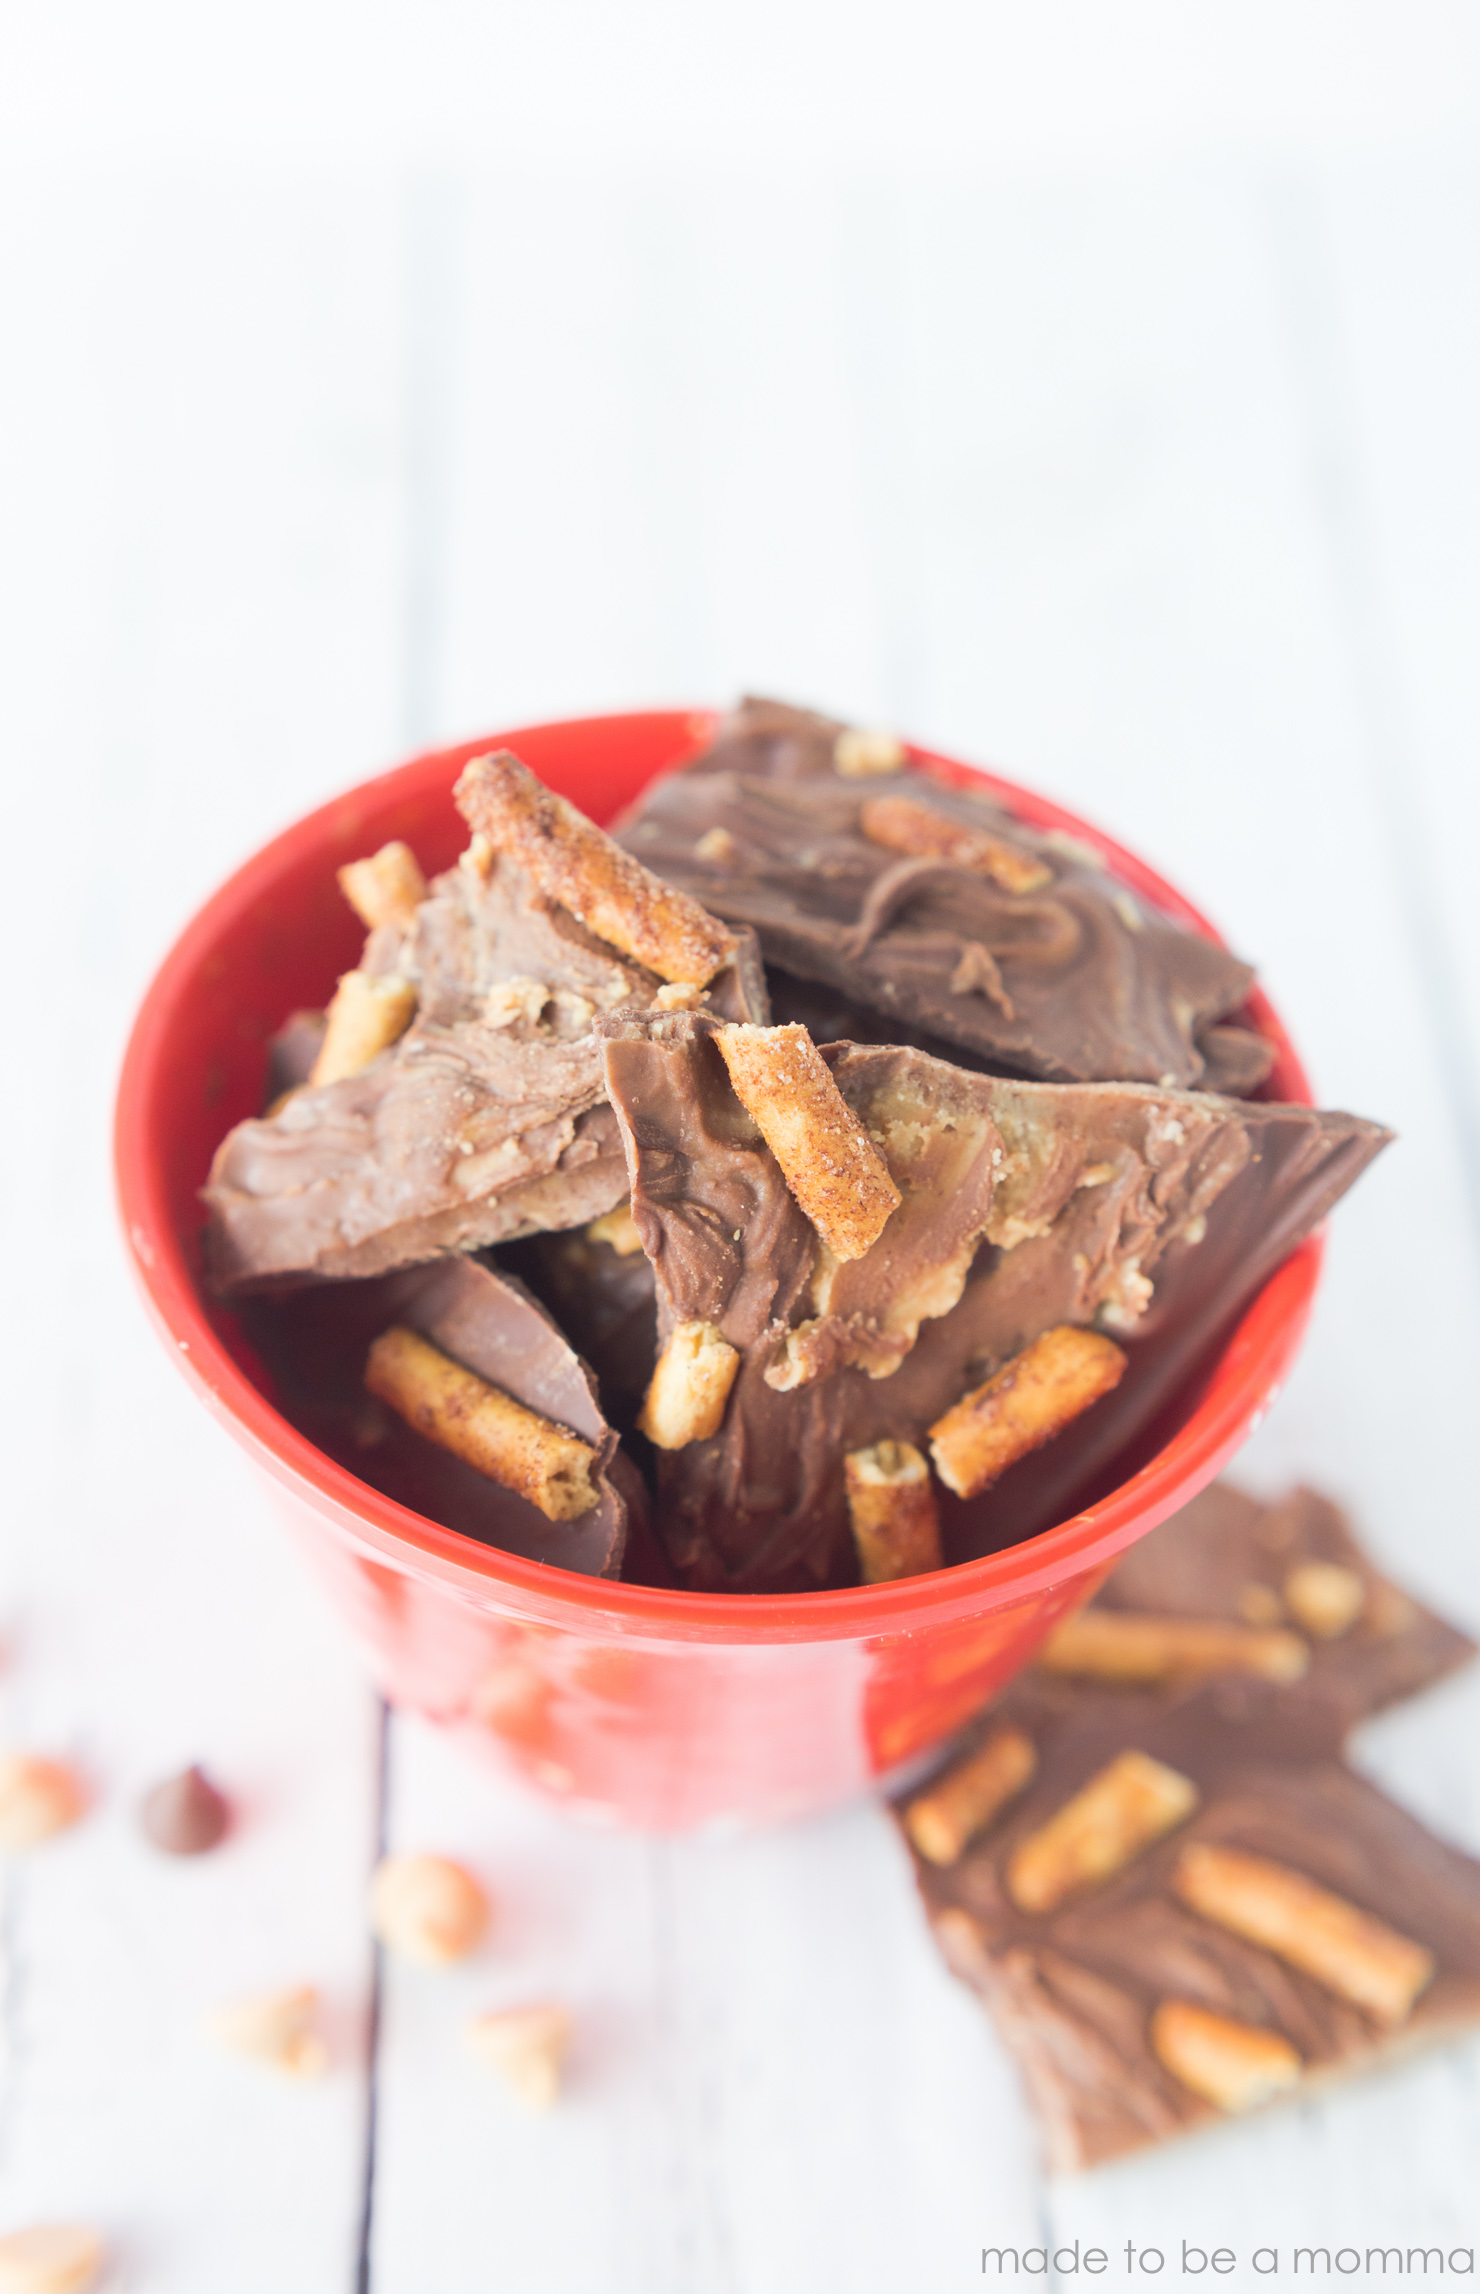 This Chocolate & Peanut Butter Pretzel Bark is simple and delicious! Who doesn't love the mix of chocolate and peanut butter?